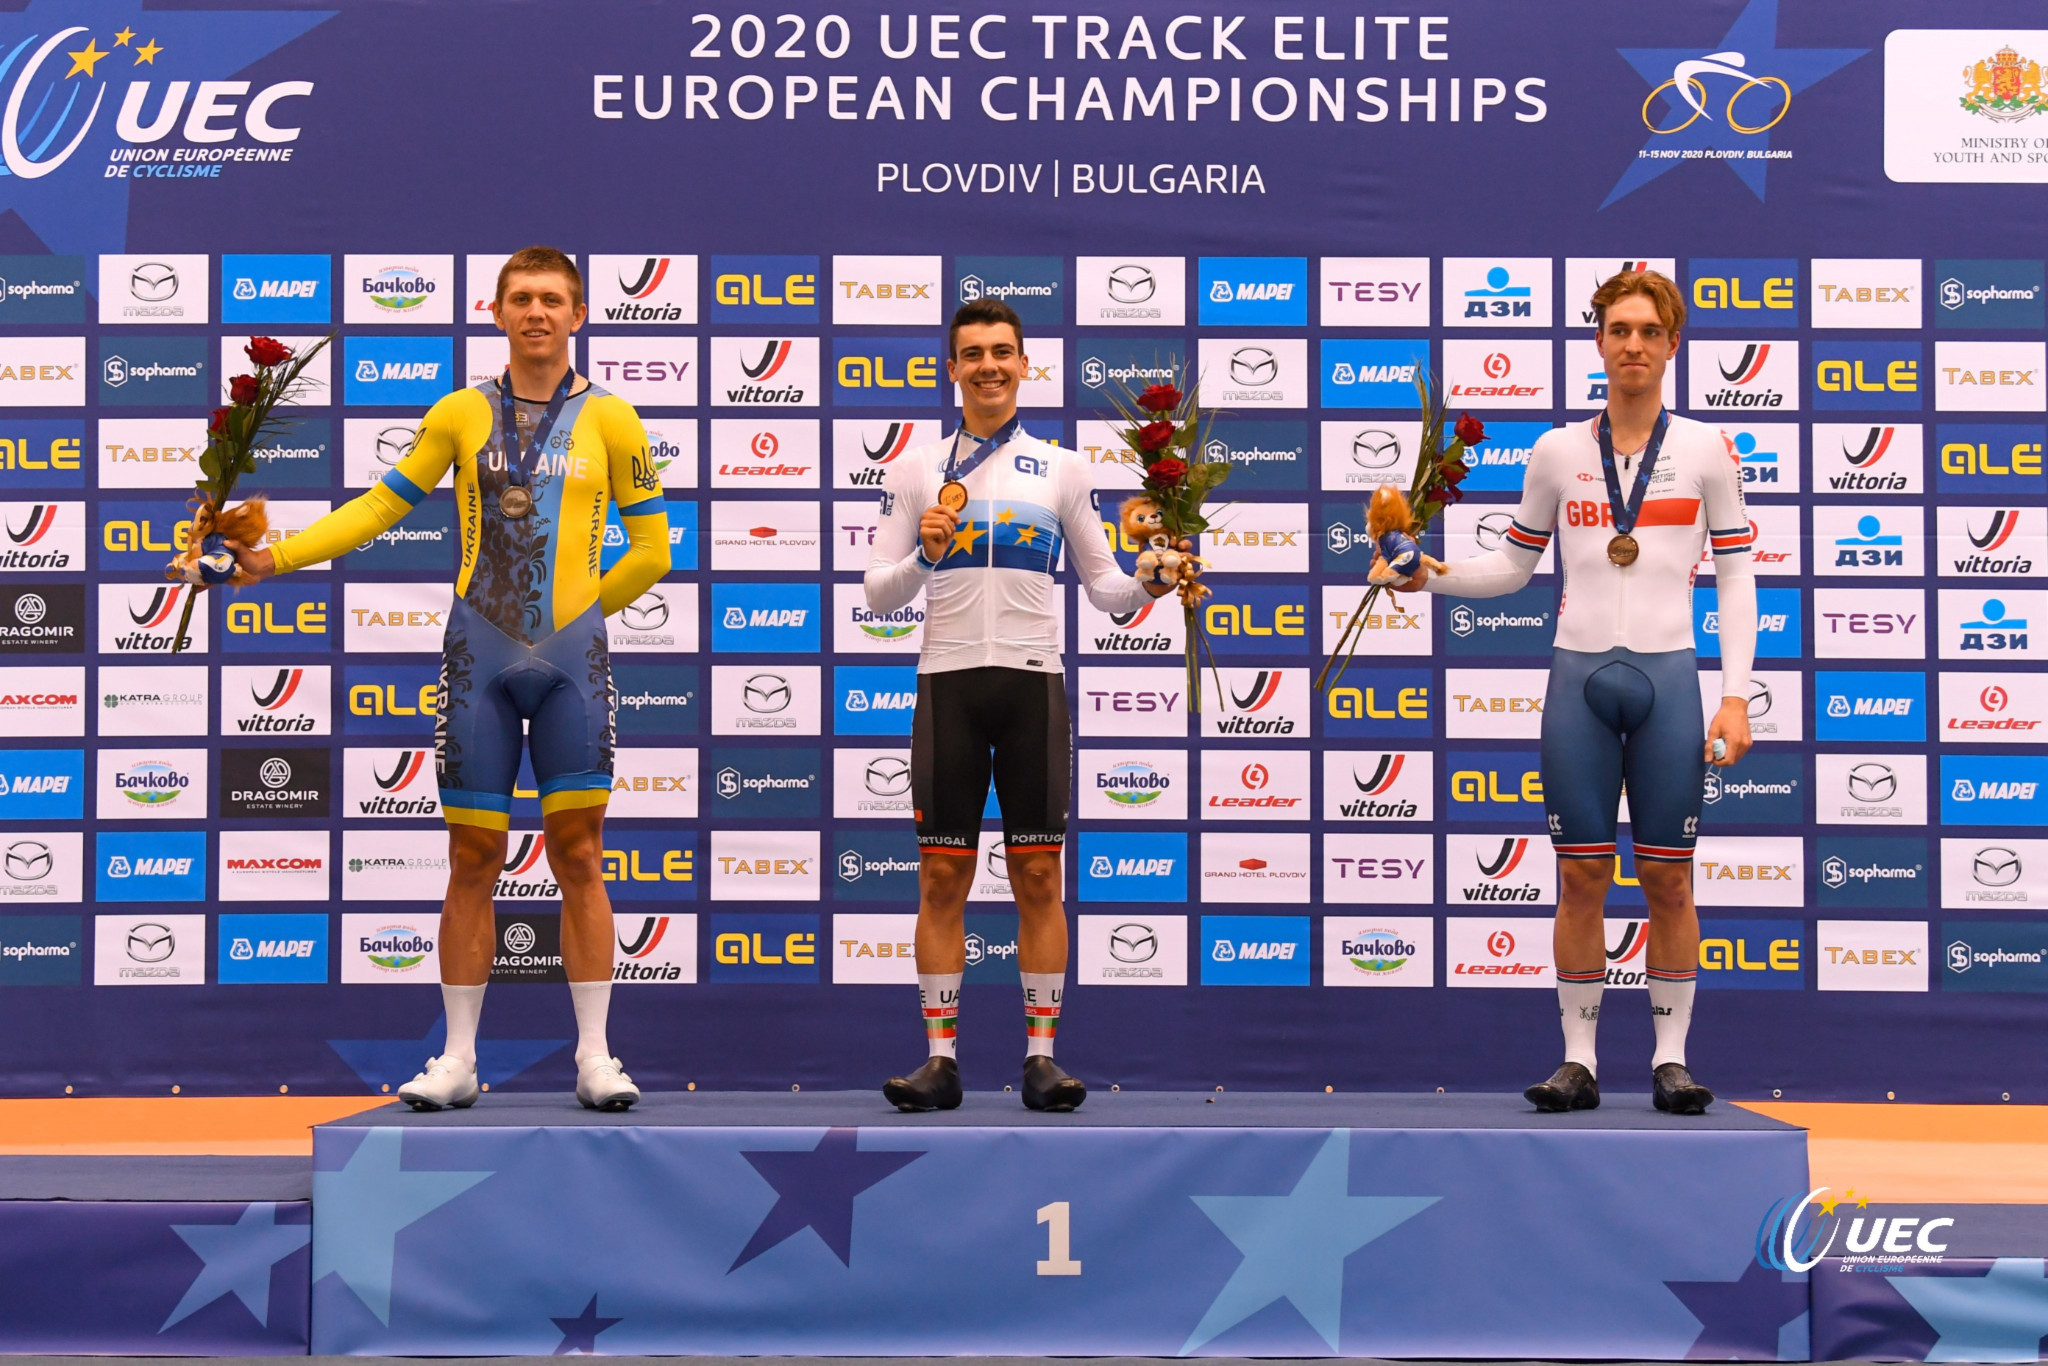 Double gold for Britain on day two of UEC Elite Track European Championships